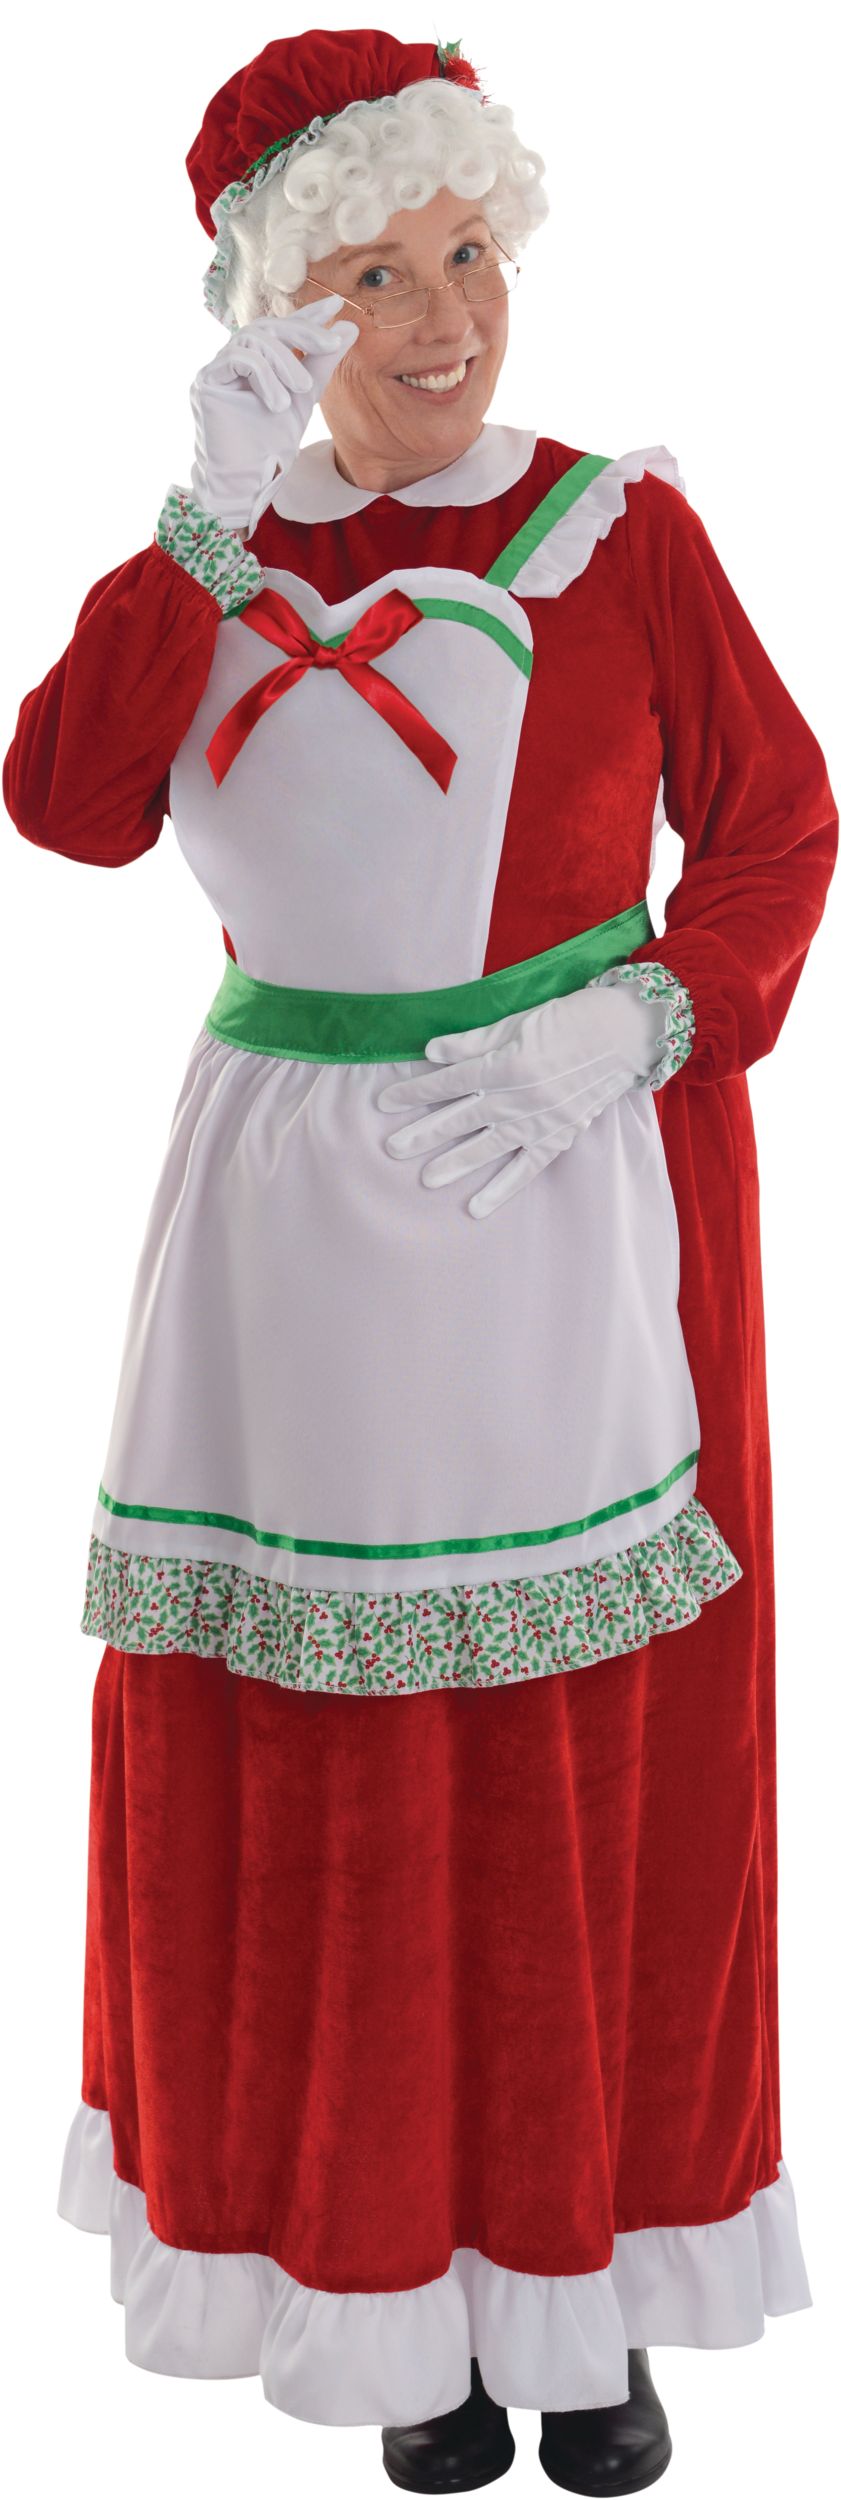 Womens Mrs Claus Costume, Ms Claus Dress